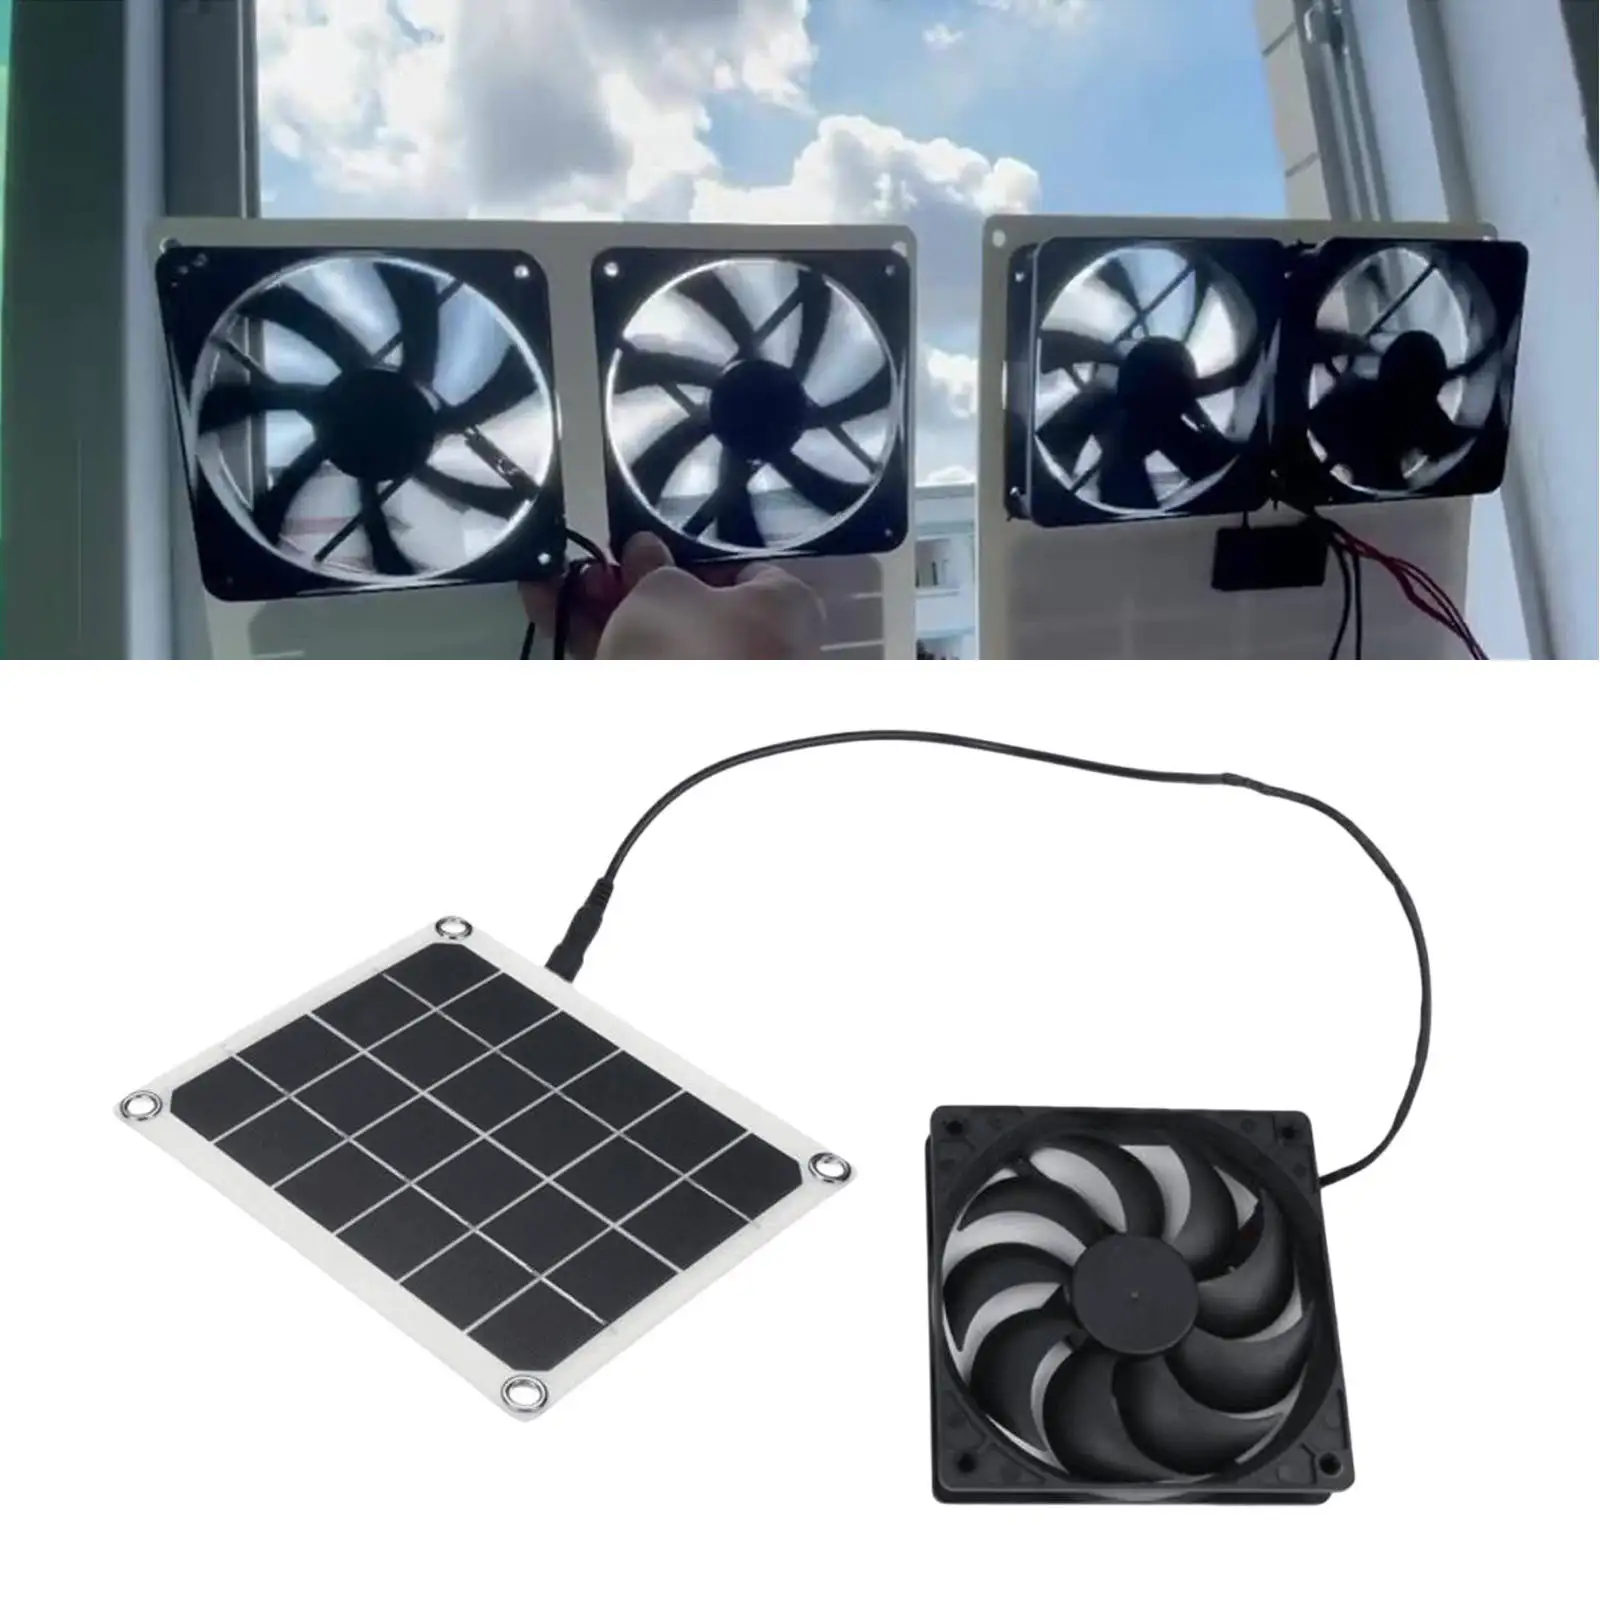 Solar Panel Powered Fan Mini Ventilator Air Extractor for Greenhouse Pet Dog Chicken House Greenhouse Cooling (10W)